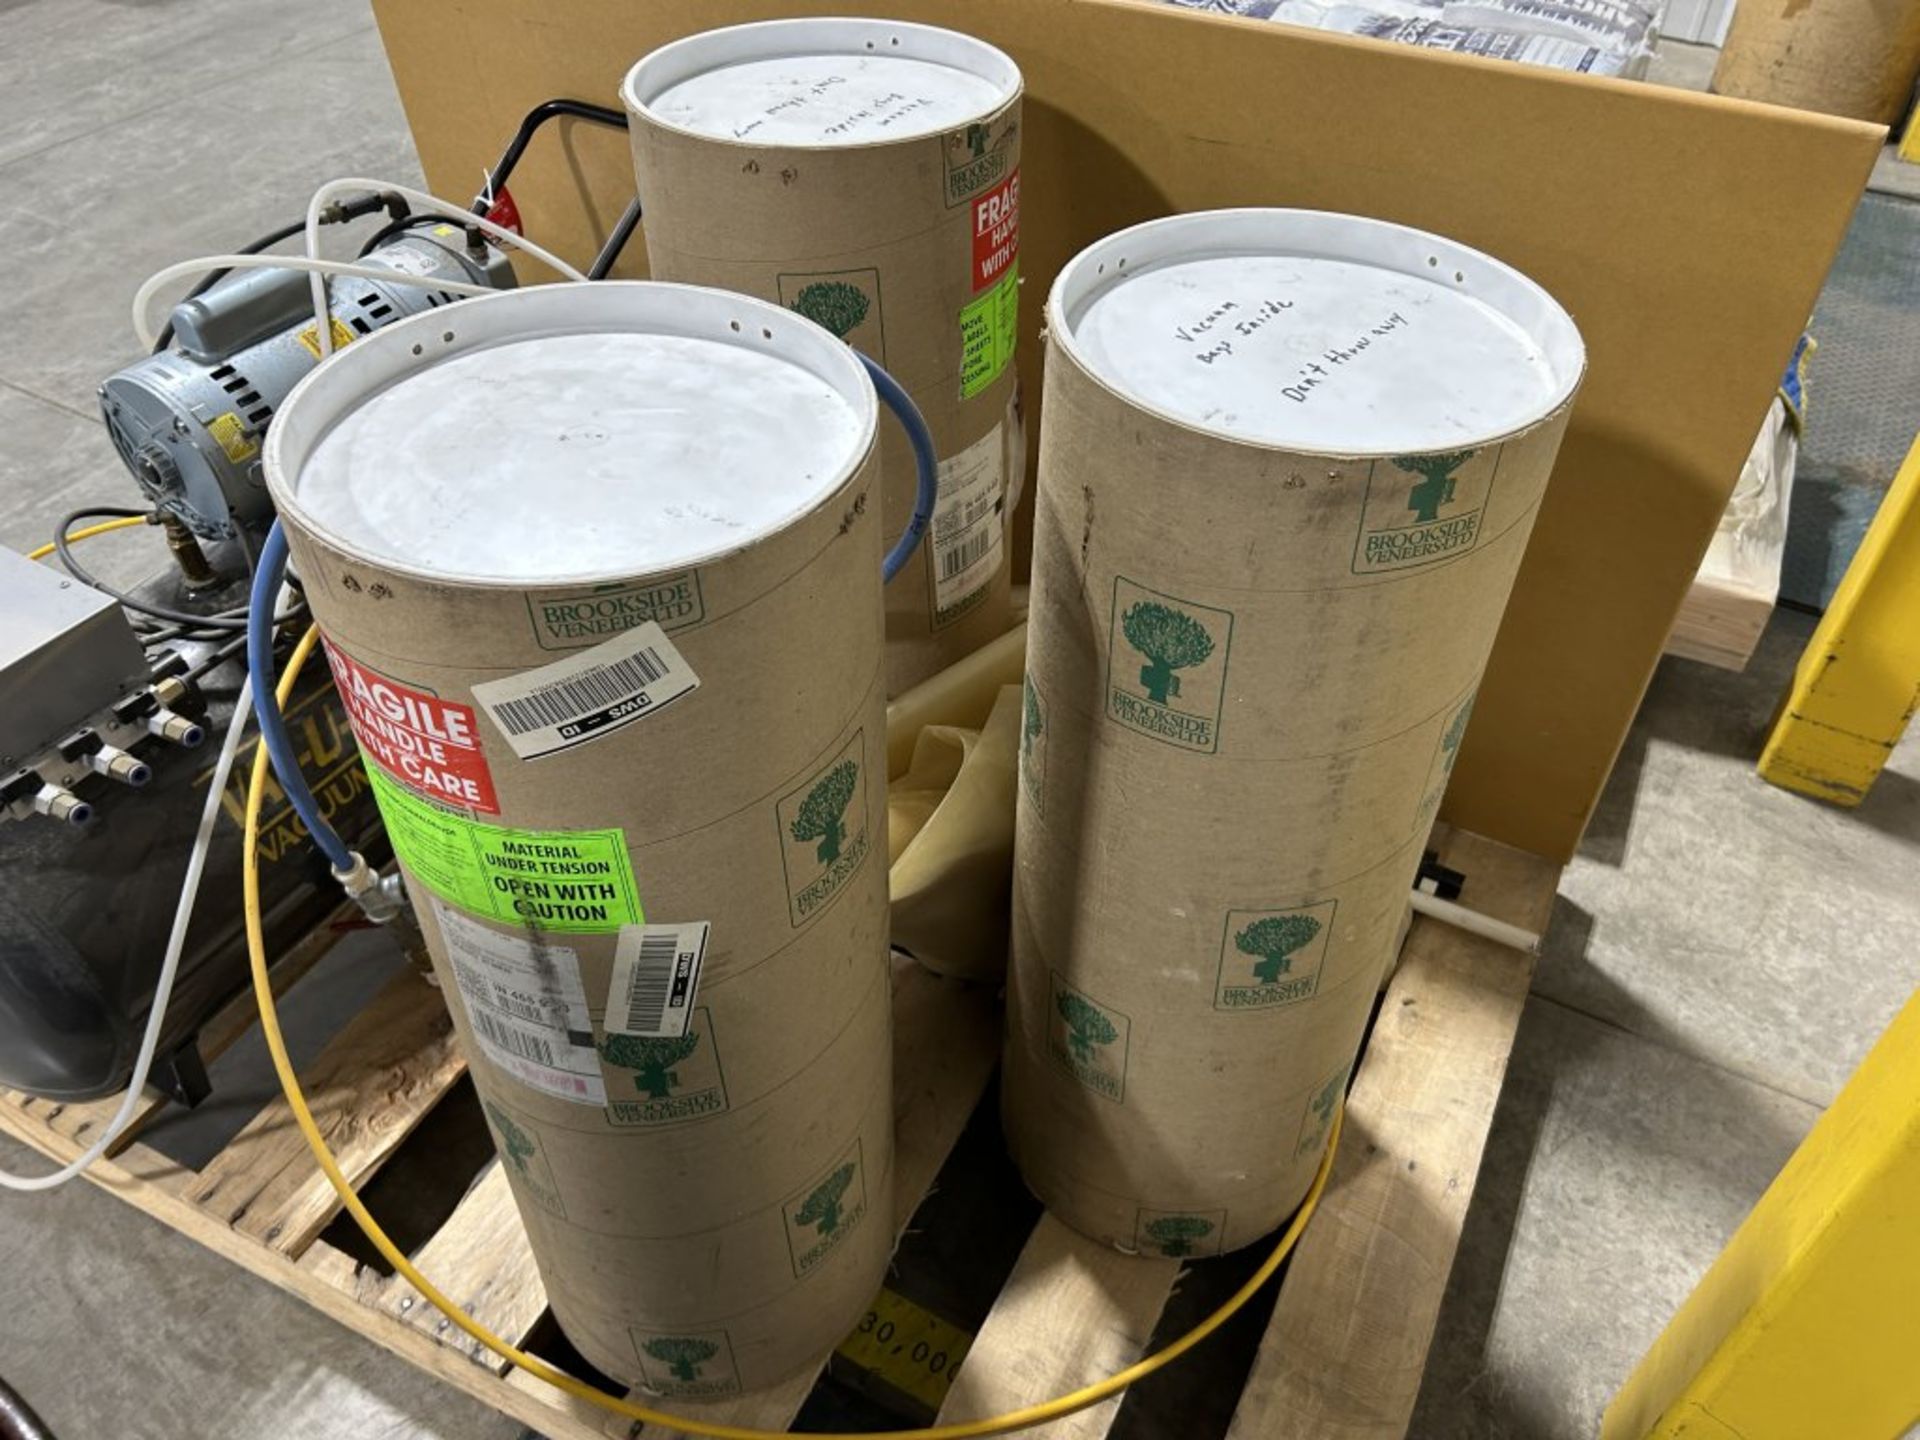 VAC-U-CLAMP VACUUM SYSTEMS UNIT, 3/4 HP MOTOR, WITH ASSORTED VACUUM BAGS, WITH MARK X VACUUM - Image 7 of 17